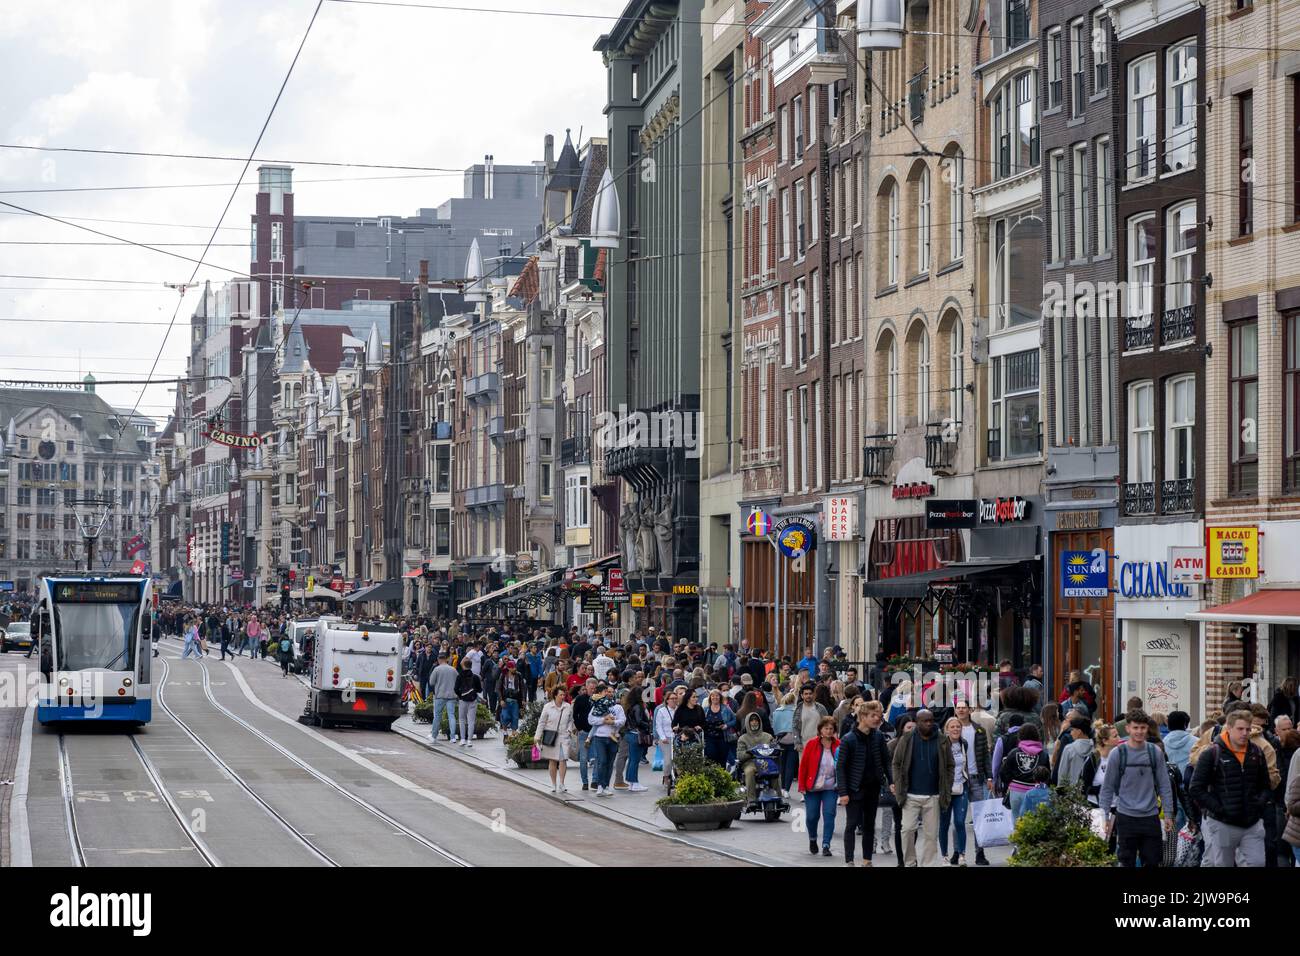 A general view of a busy street in Amsterdam, Holland. Stock Photo